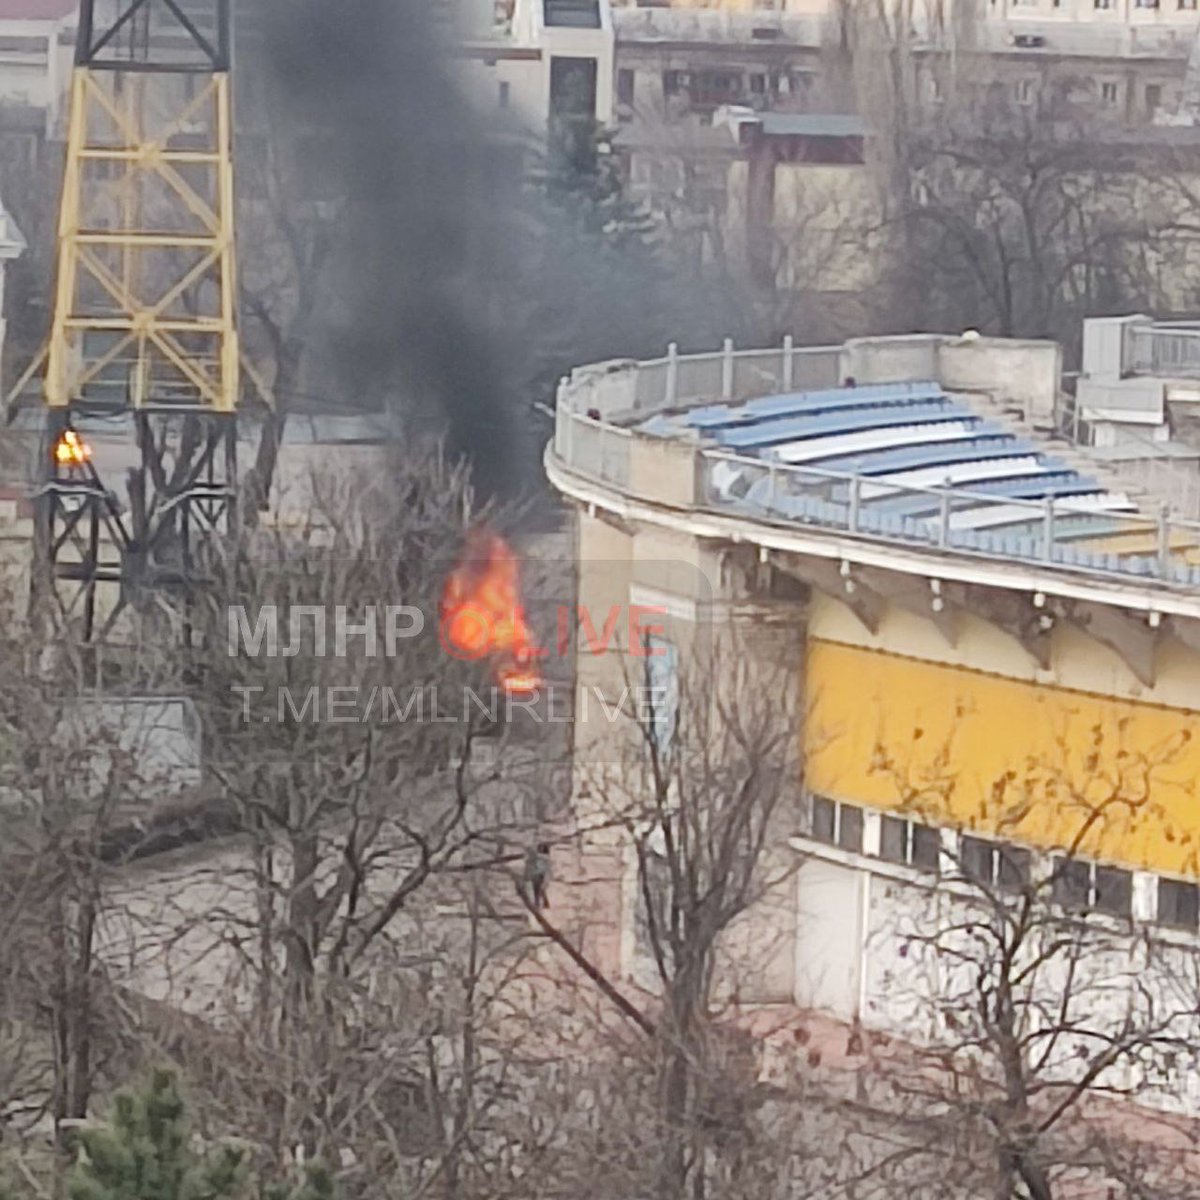 A vehicle was blown up in central Luhansk